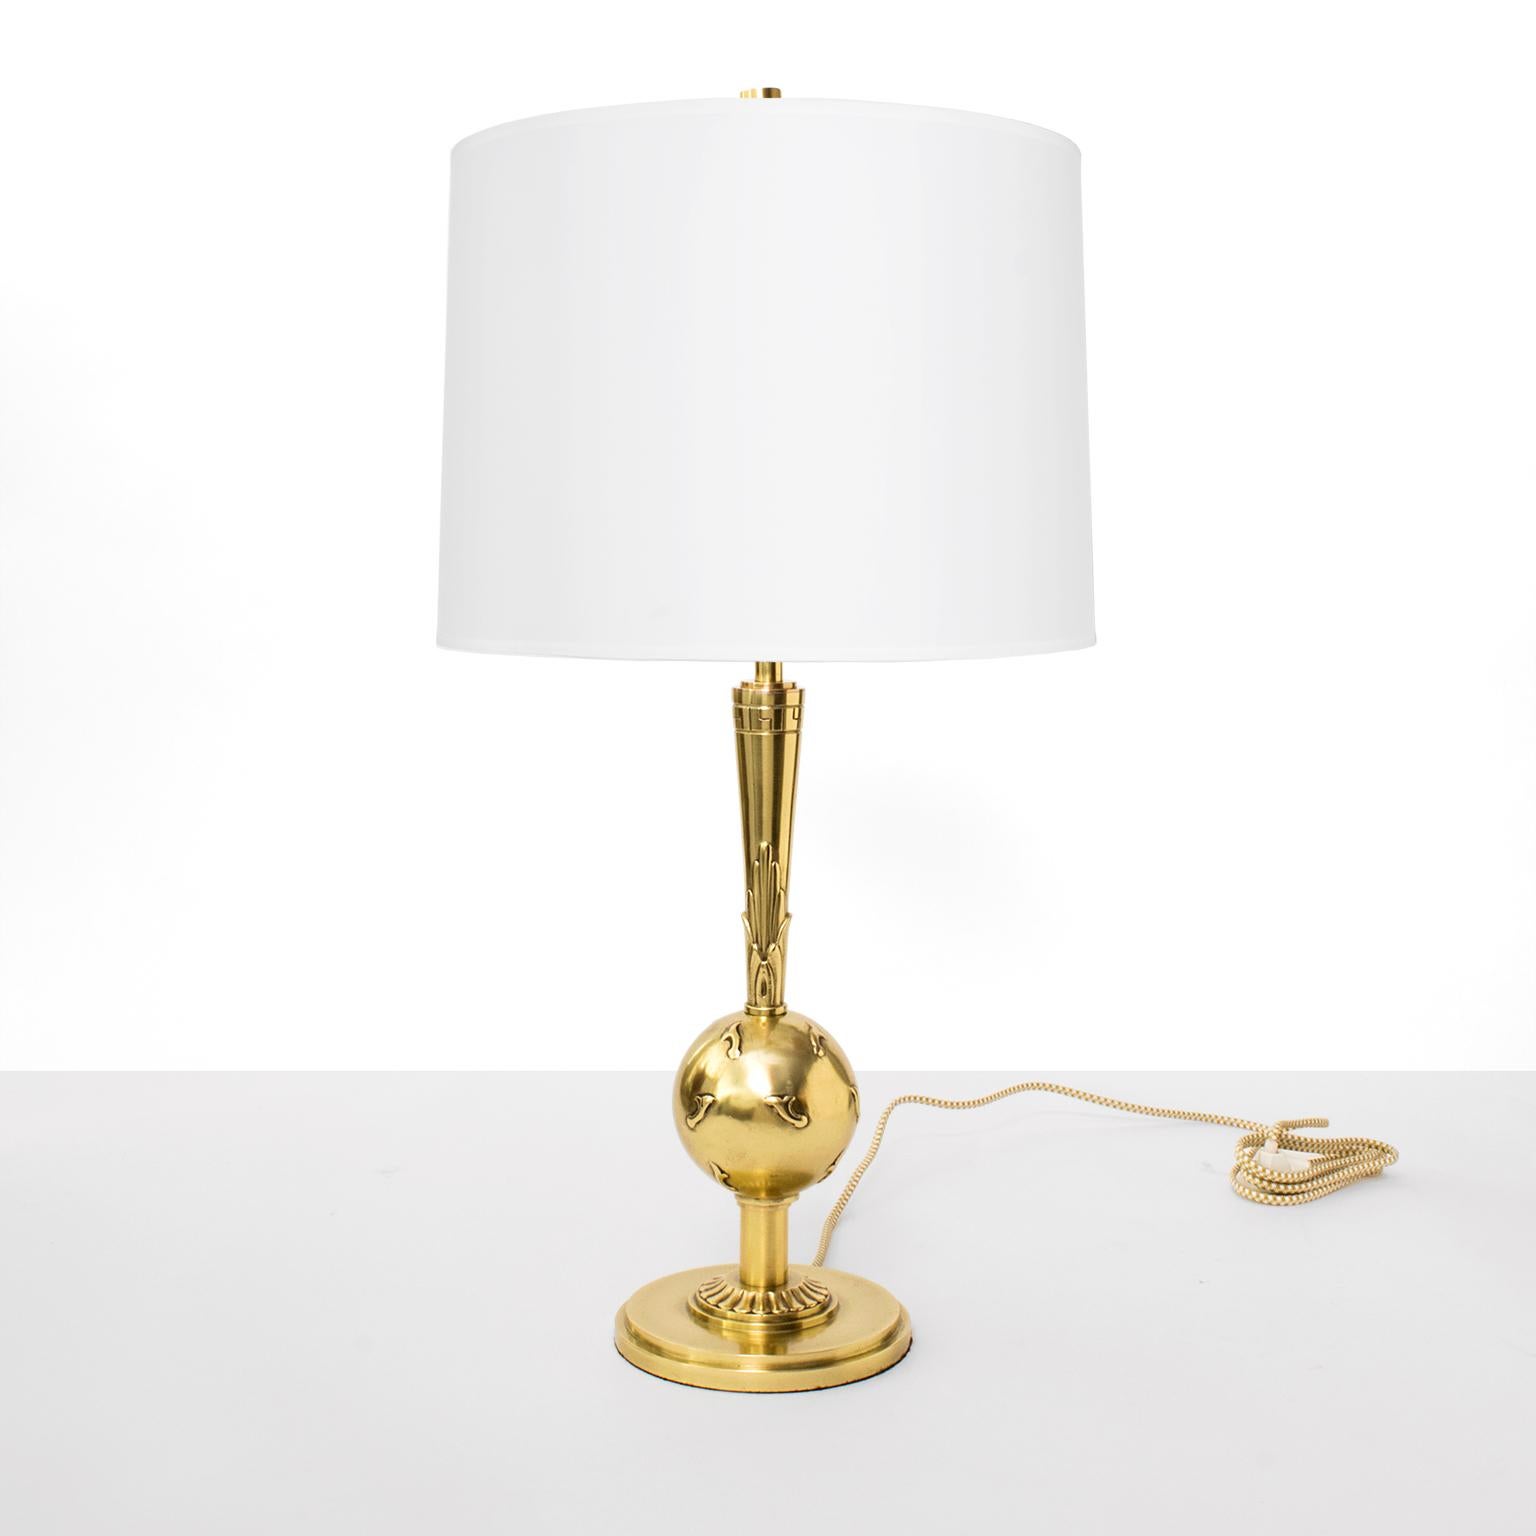 Scandinavian Modern, Art Deco bronze table lamp with a stepped platform, a decorated sphere and stem. Newly rewired high quality brass hardware and a double cluster standard sockets, ready for use for the USA.
 
Measures: Diameter 5.25